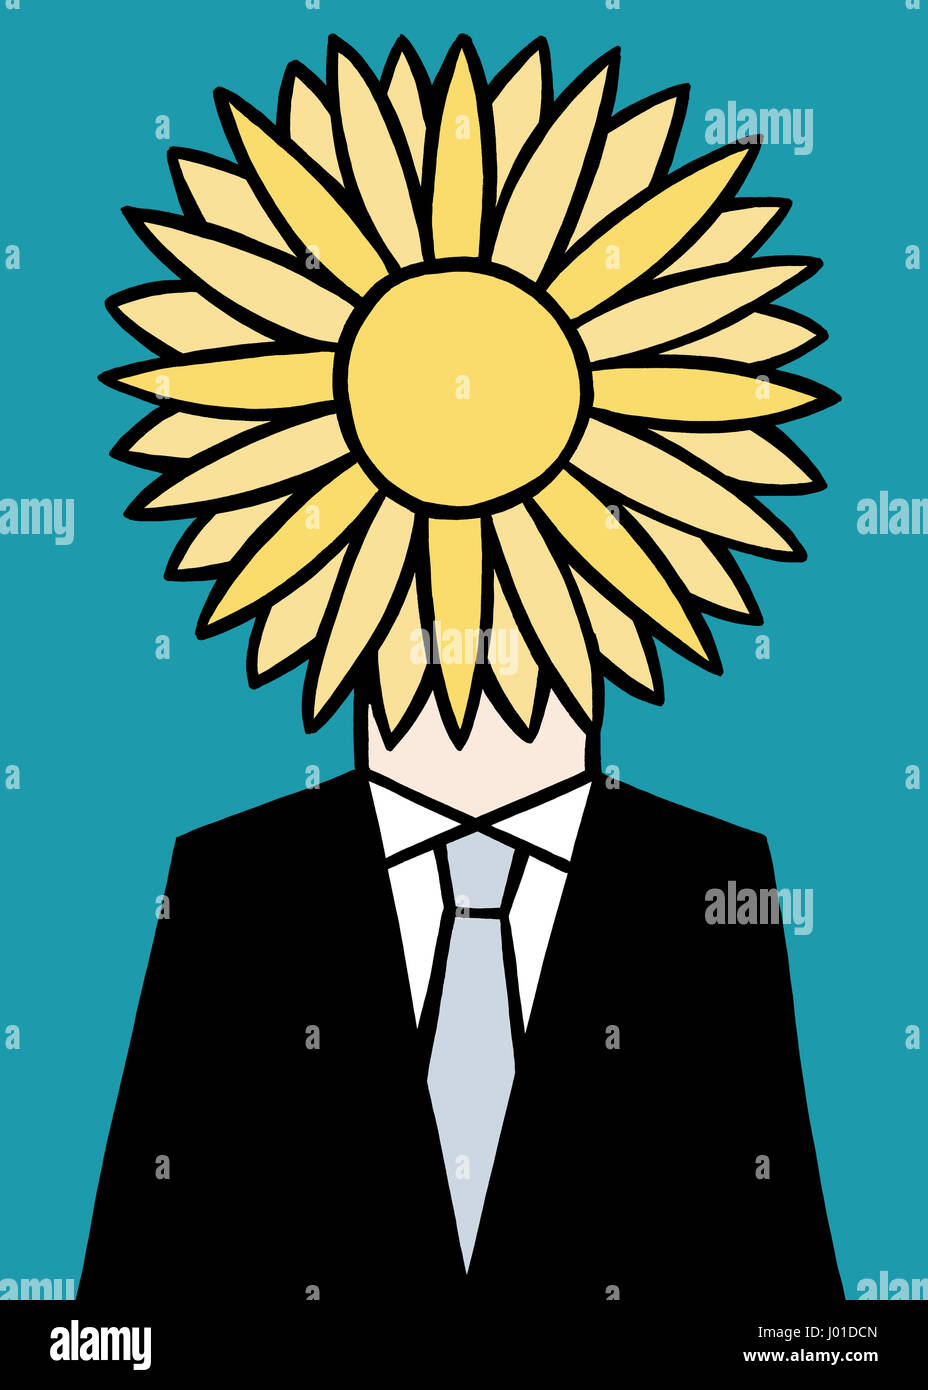 I am your sunshine. A business illustration about thinking different thoughts. Stock Photo